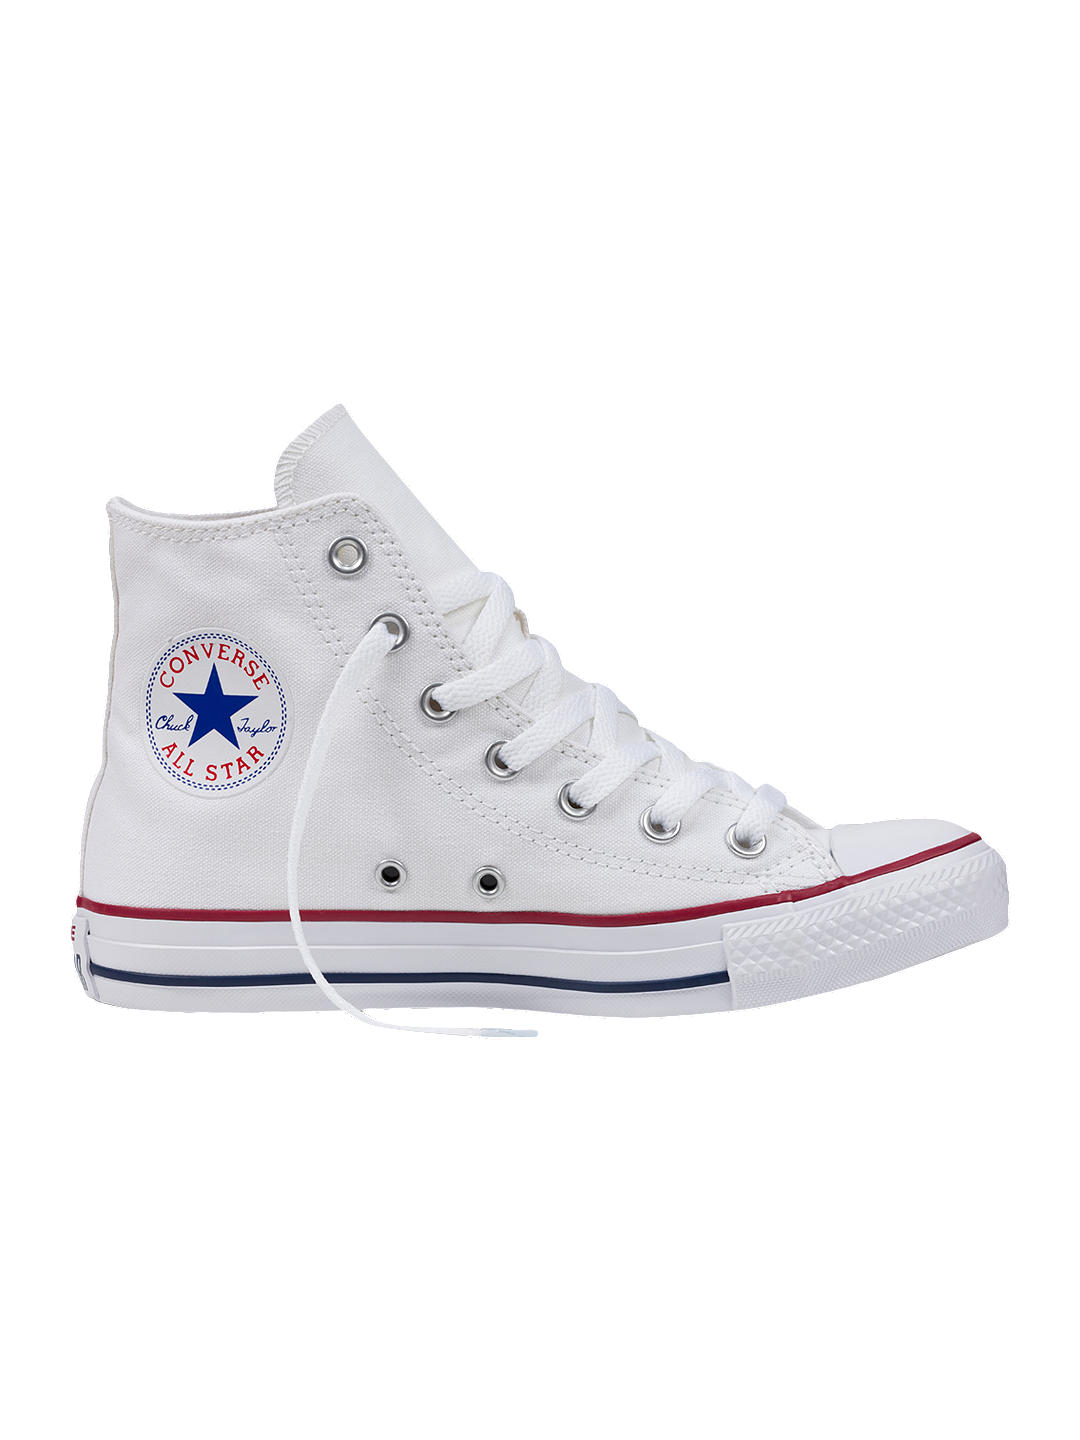 Converse All Star Hi-Top Trainers, White at John Lewis & Partners